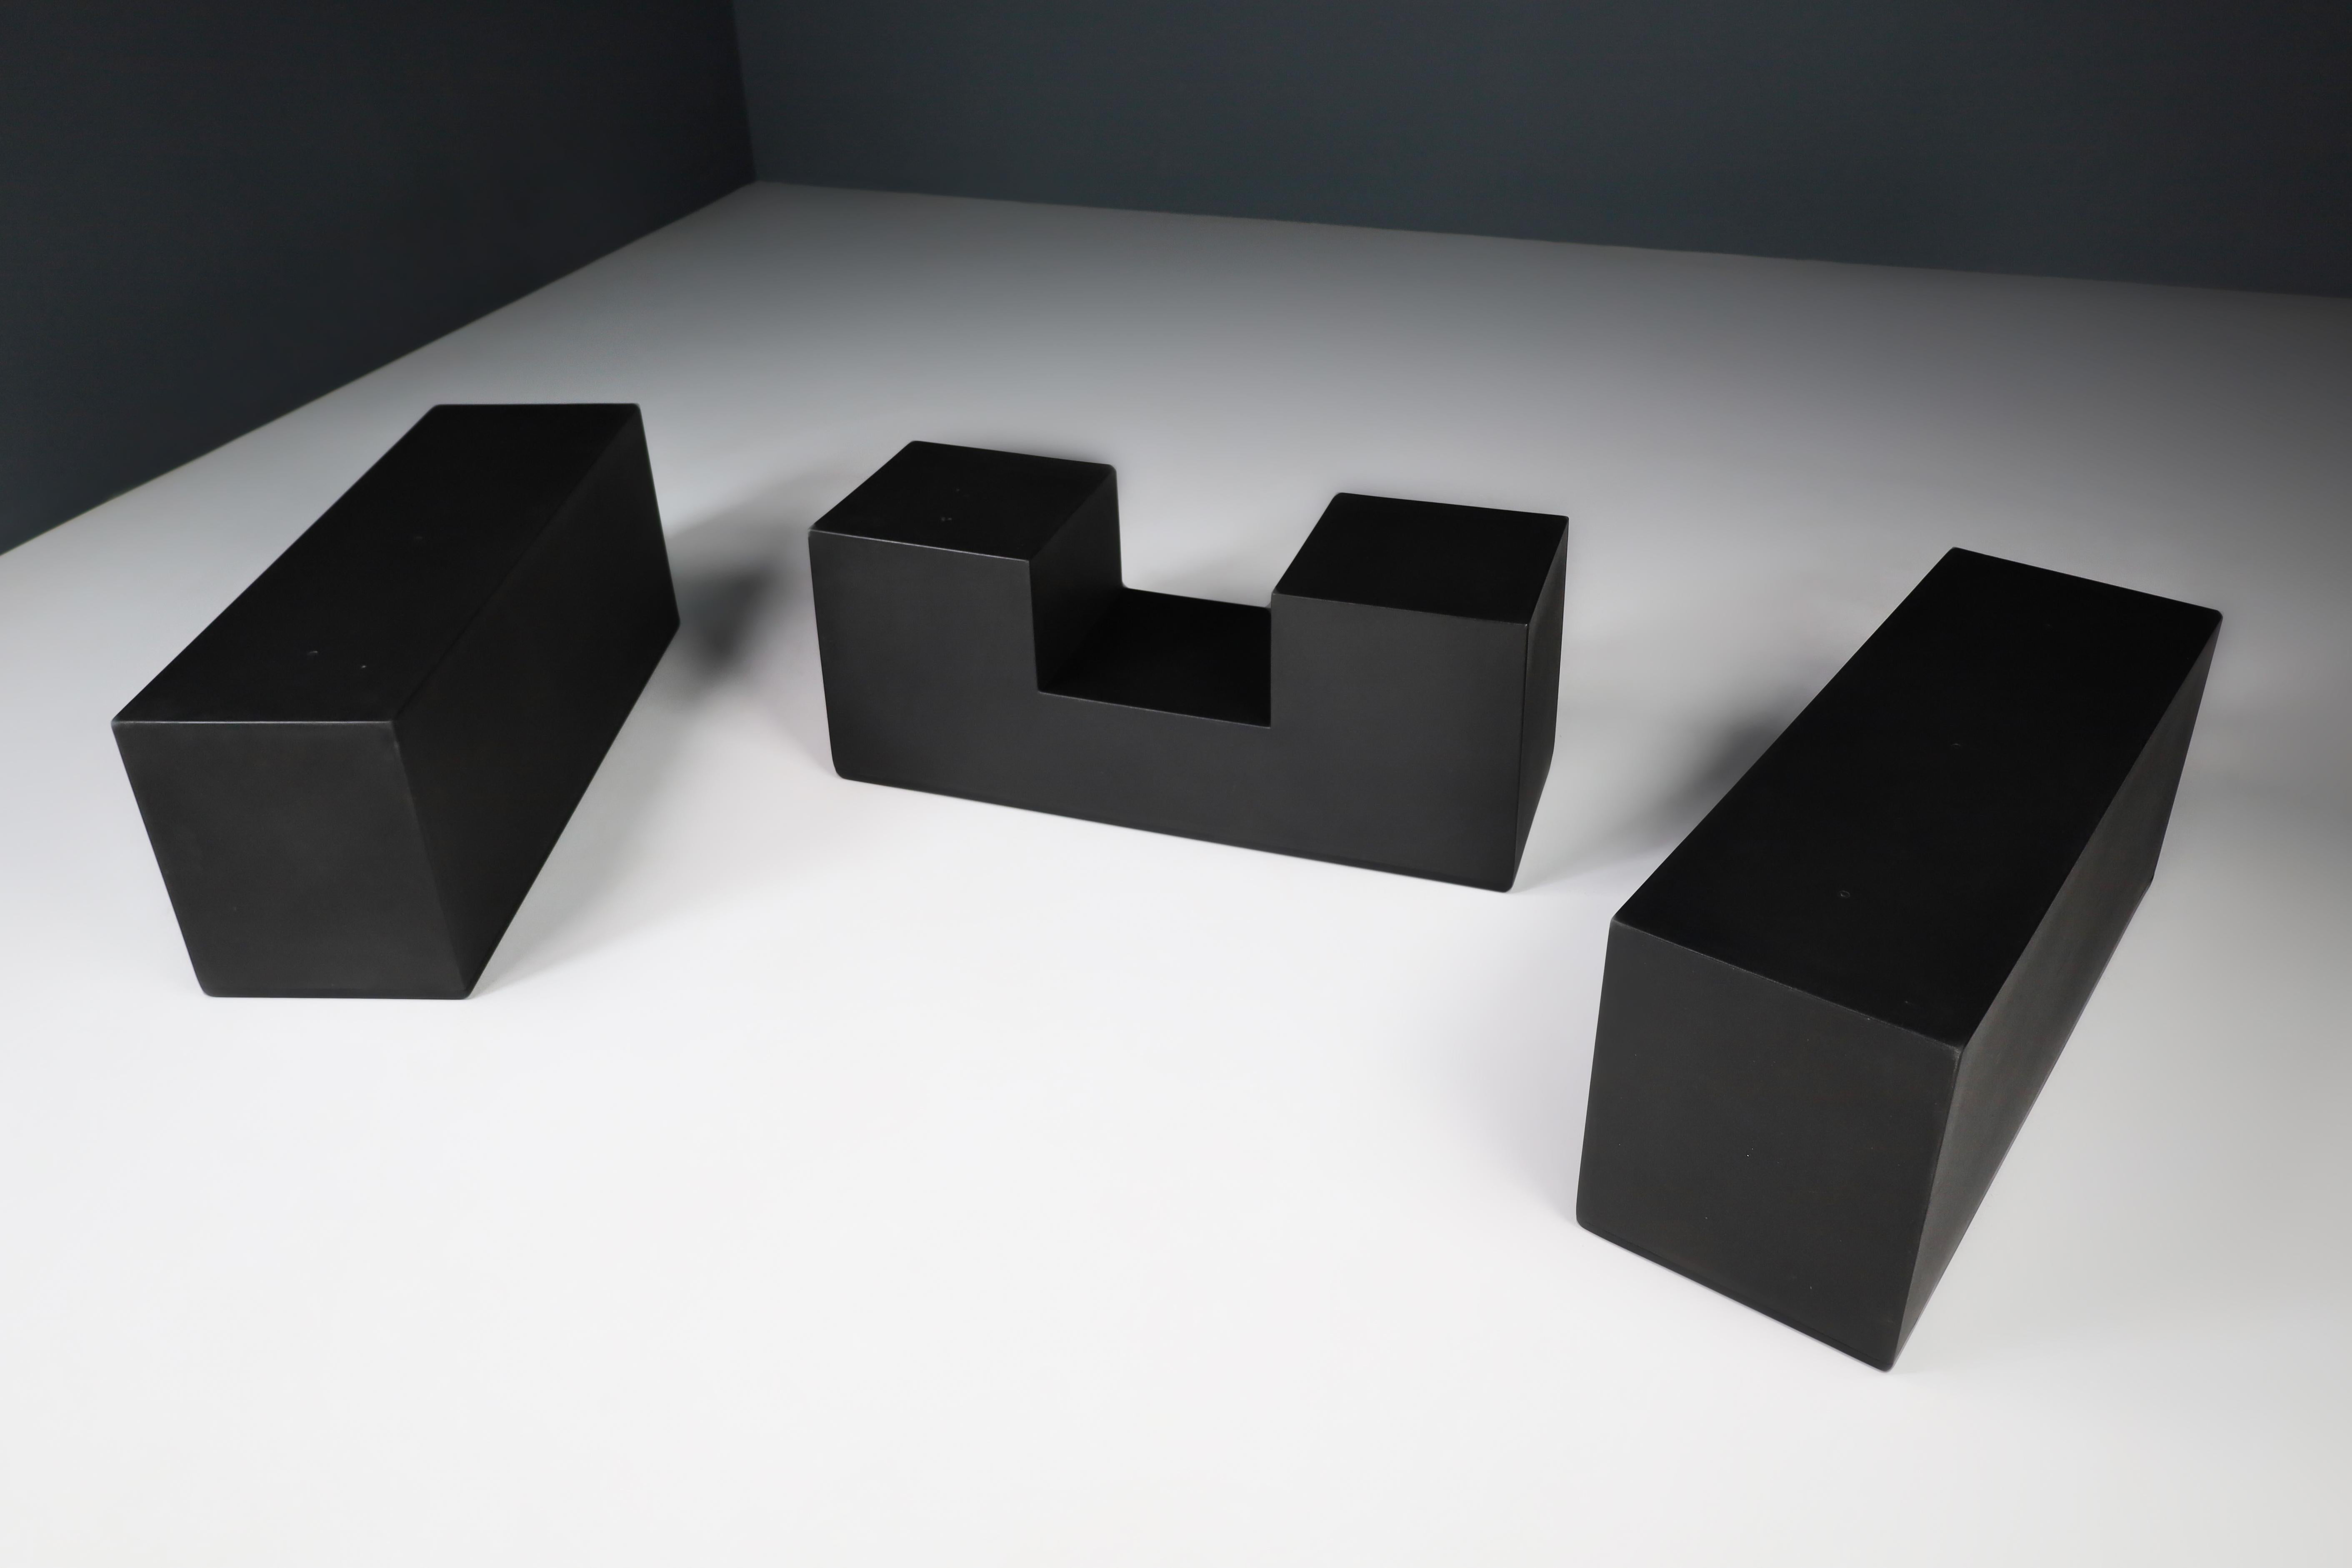 Mario Bellini 'Gli Scacchi' Pieces for C&B Italia, 1971 

A set of three pieces from the Gli Scacchi series, translated meaning 'The Chess' designed in 1971 by renowned Italian architect Mario Bellini. These are early pieces manufactured by C&B